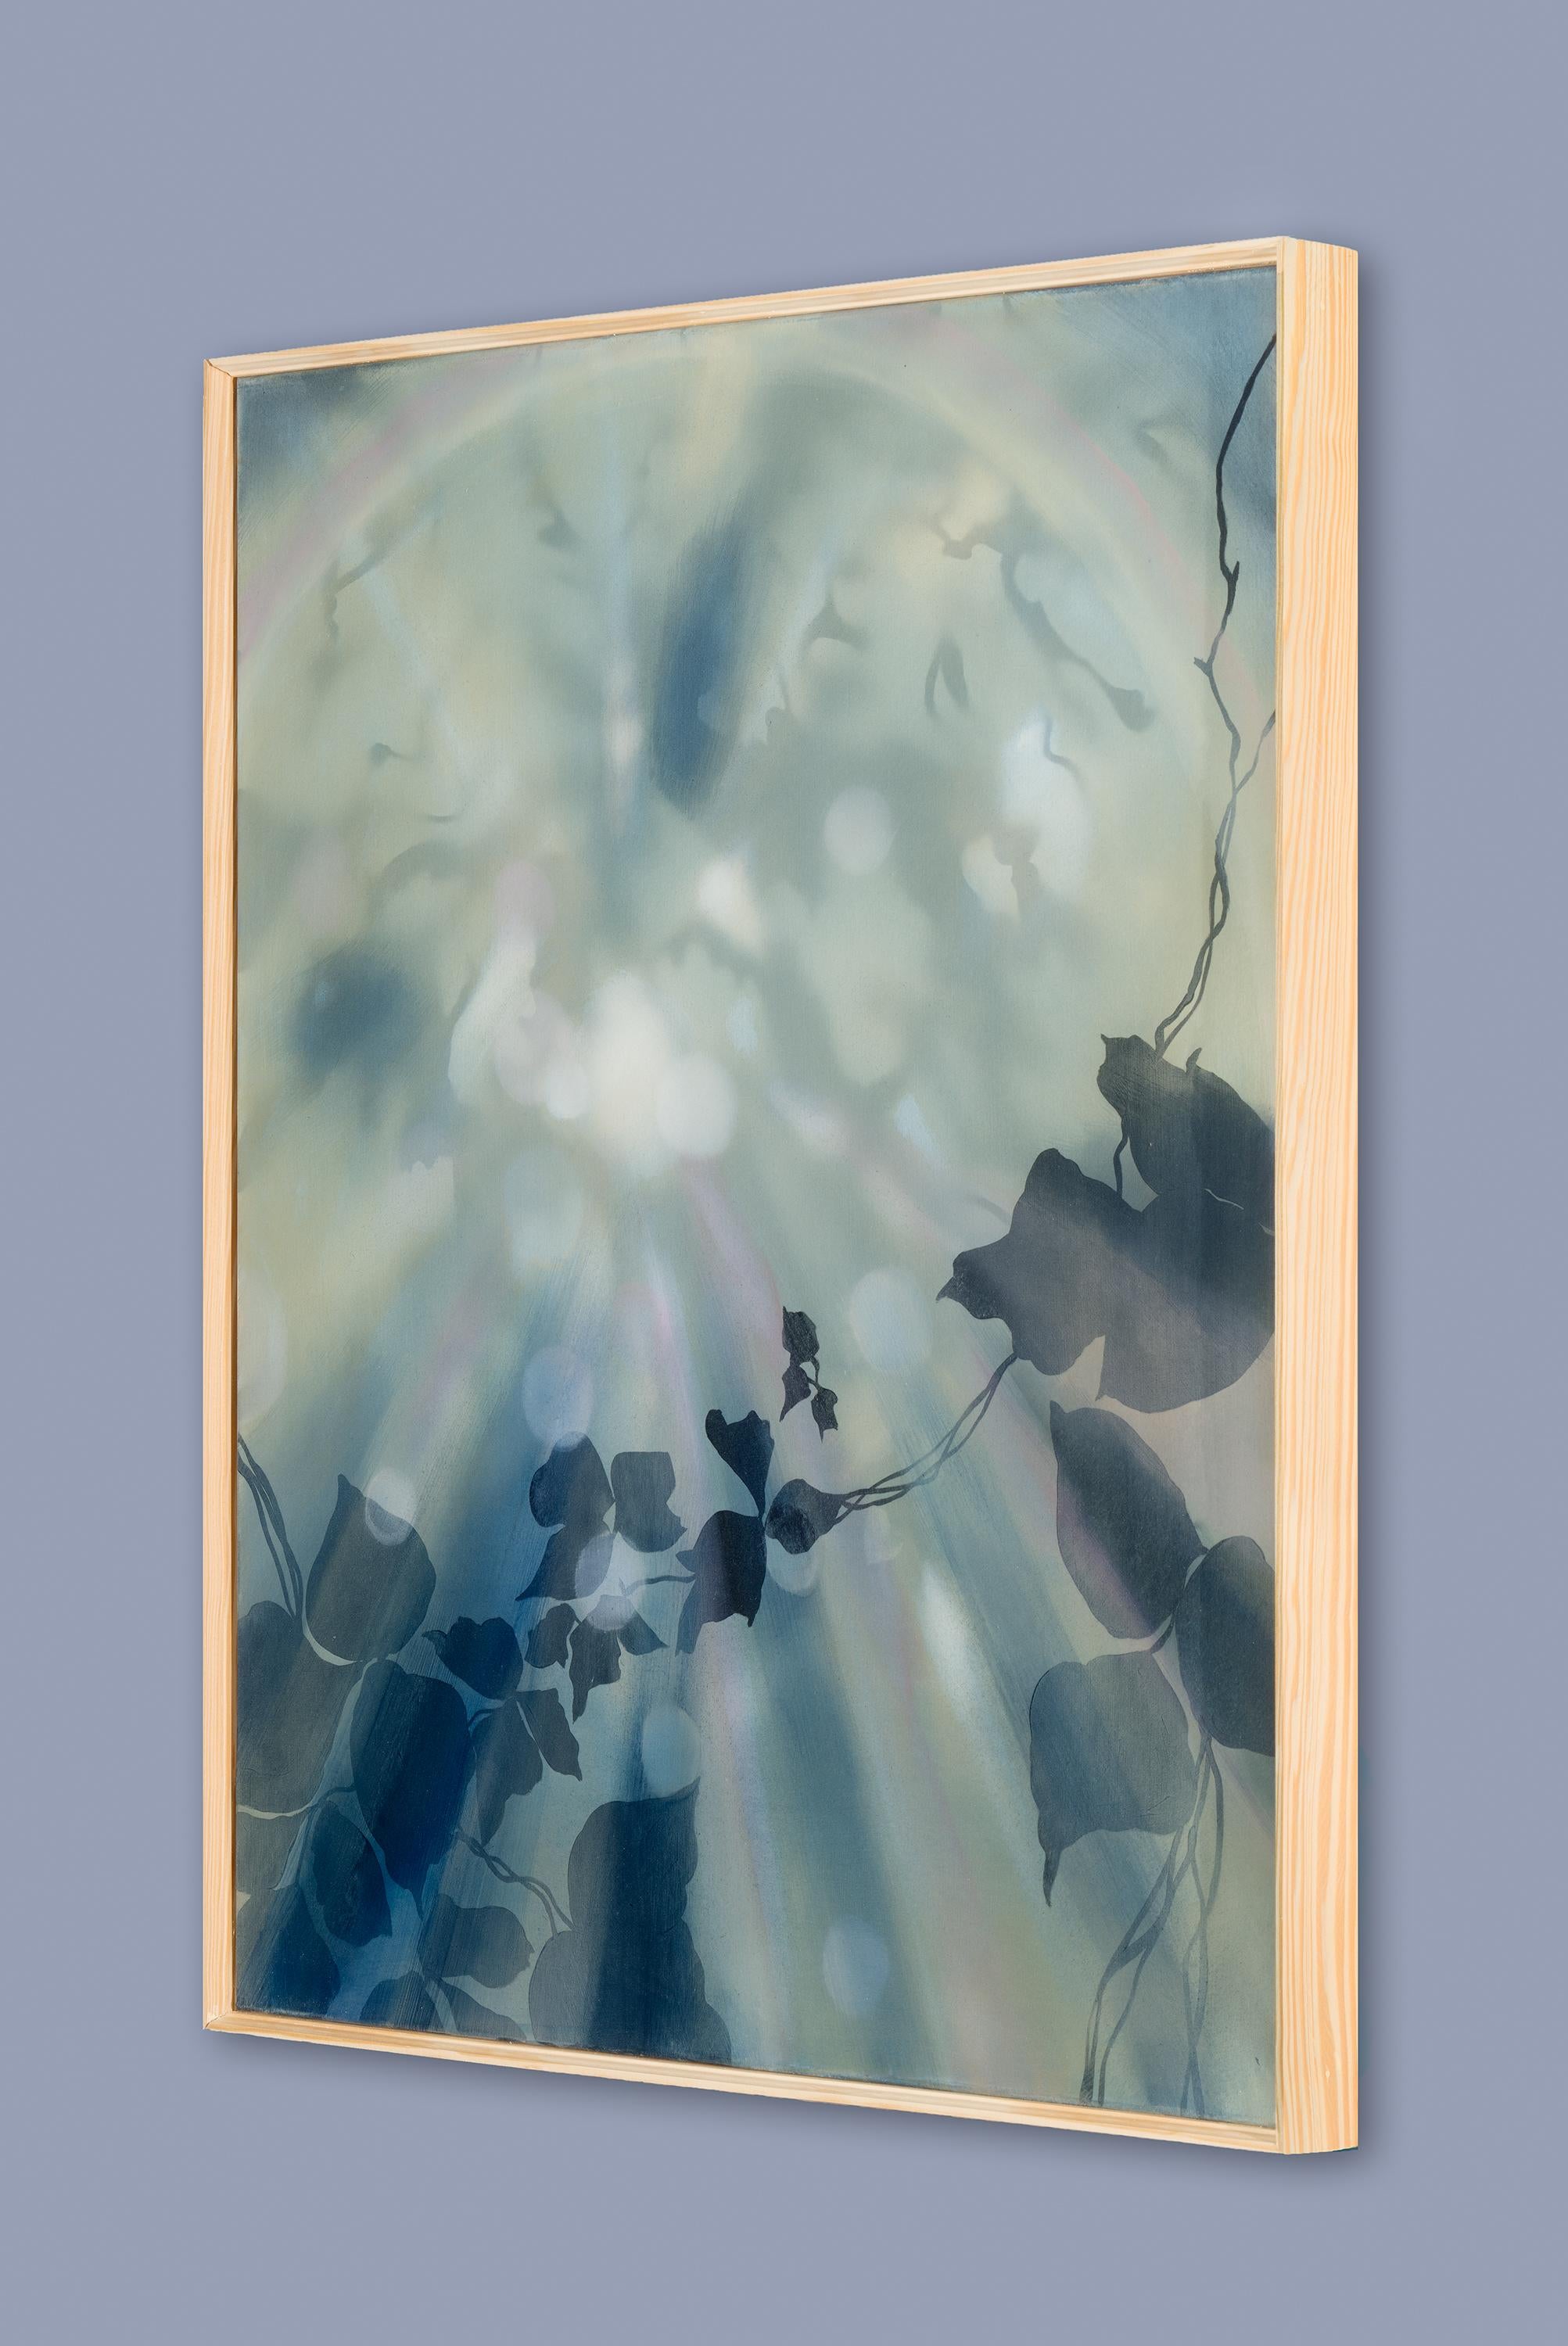 CREEPING AND CLIMBING by Heather Hartman was created for her exhibit, 